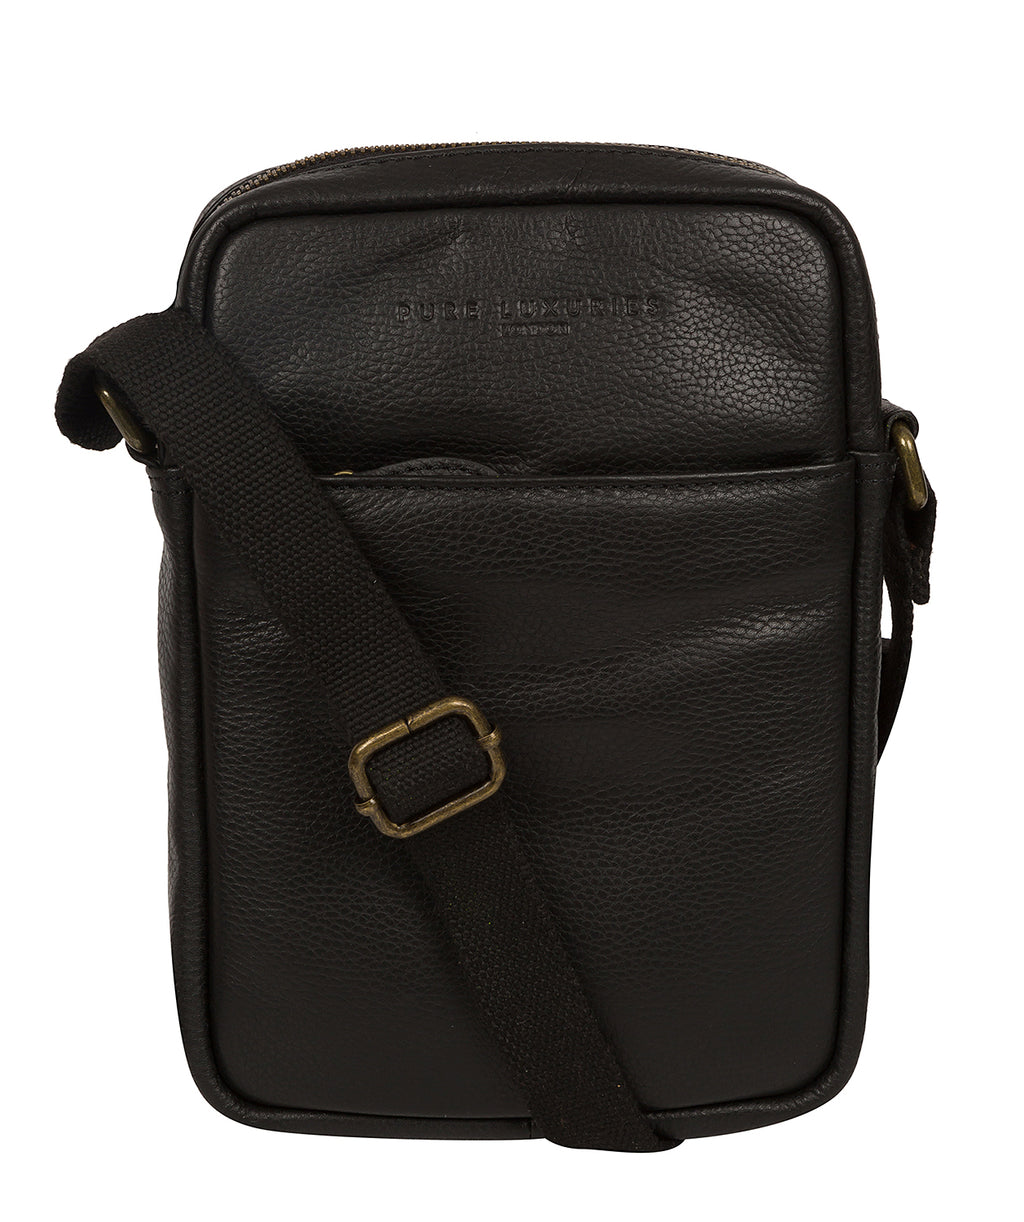 Black Leather Crossbody Bag 'Crew' by Pure Luxuries – Pure Luxuries London